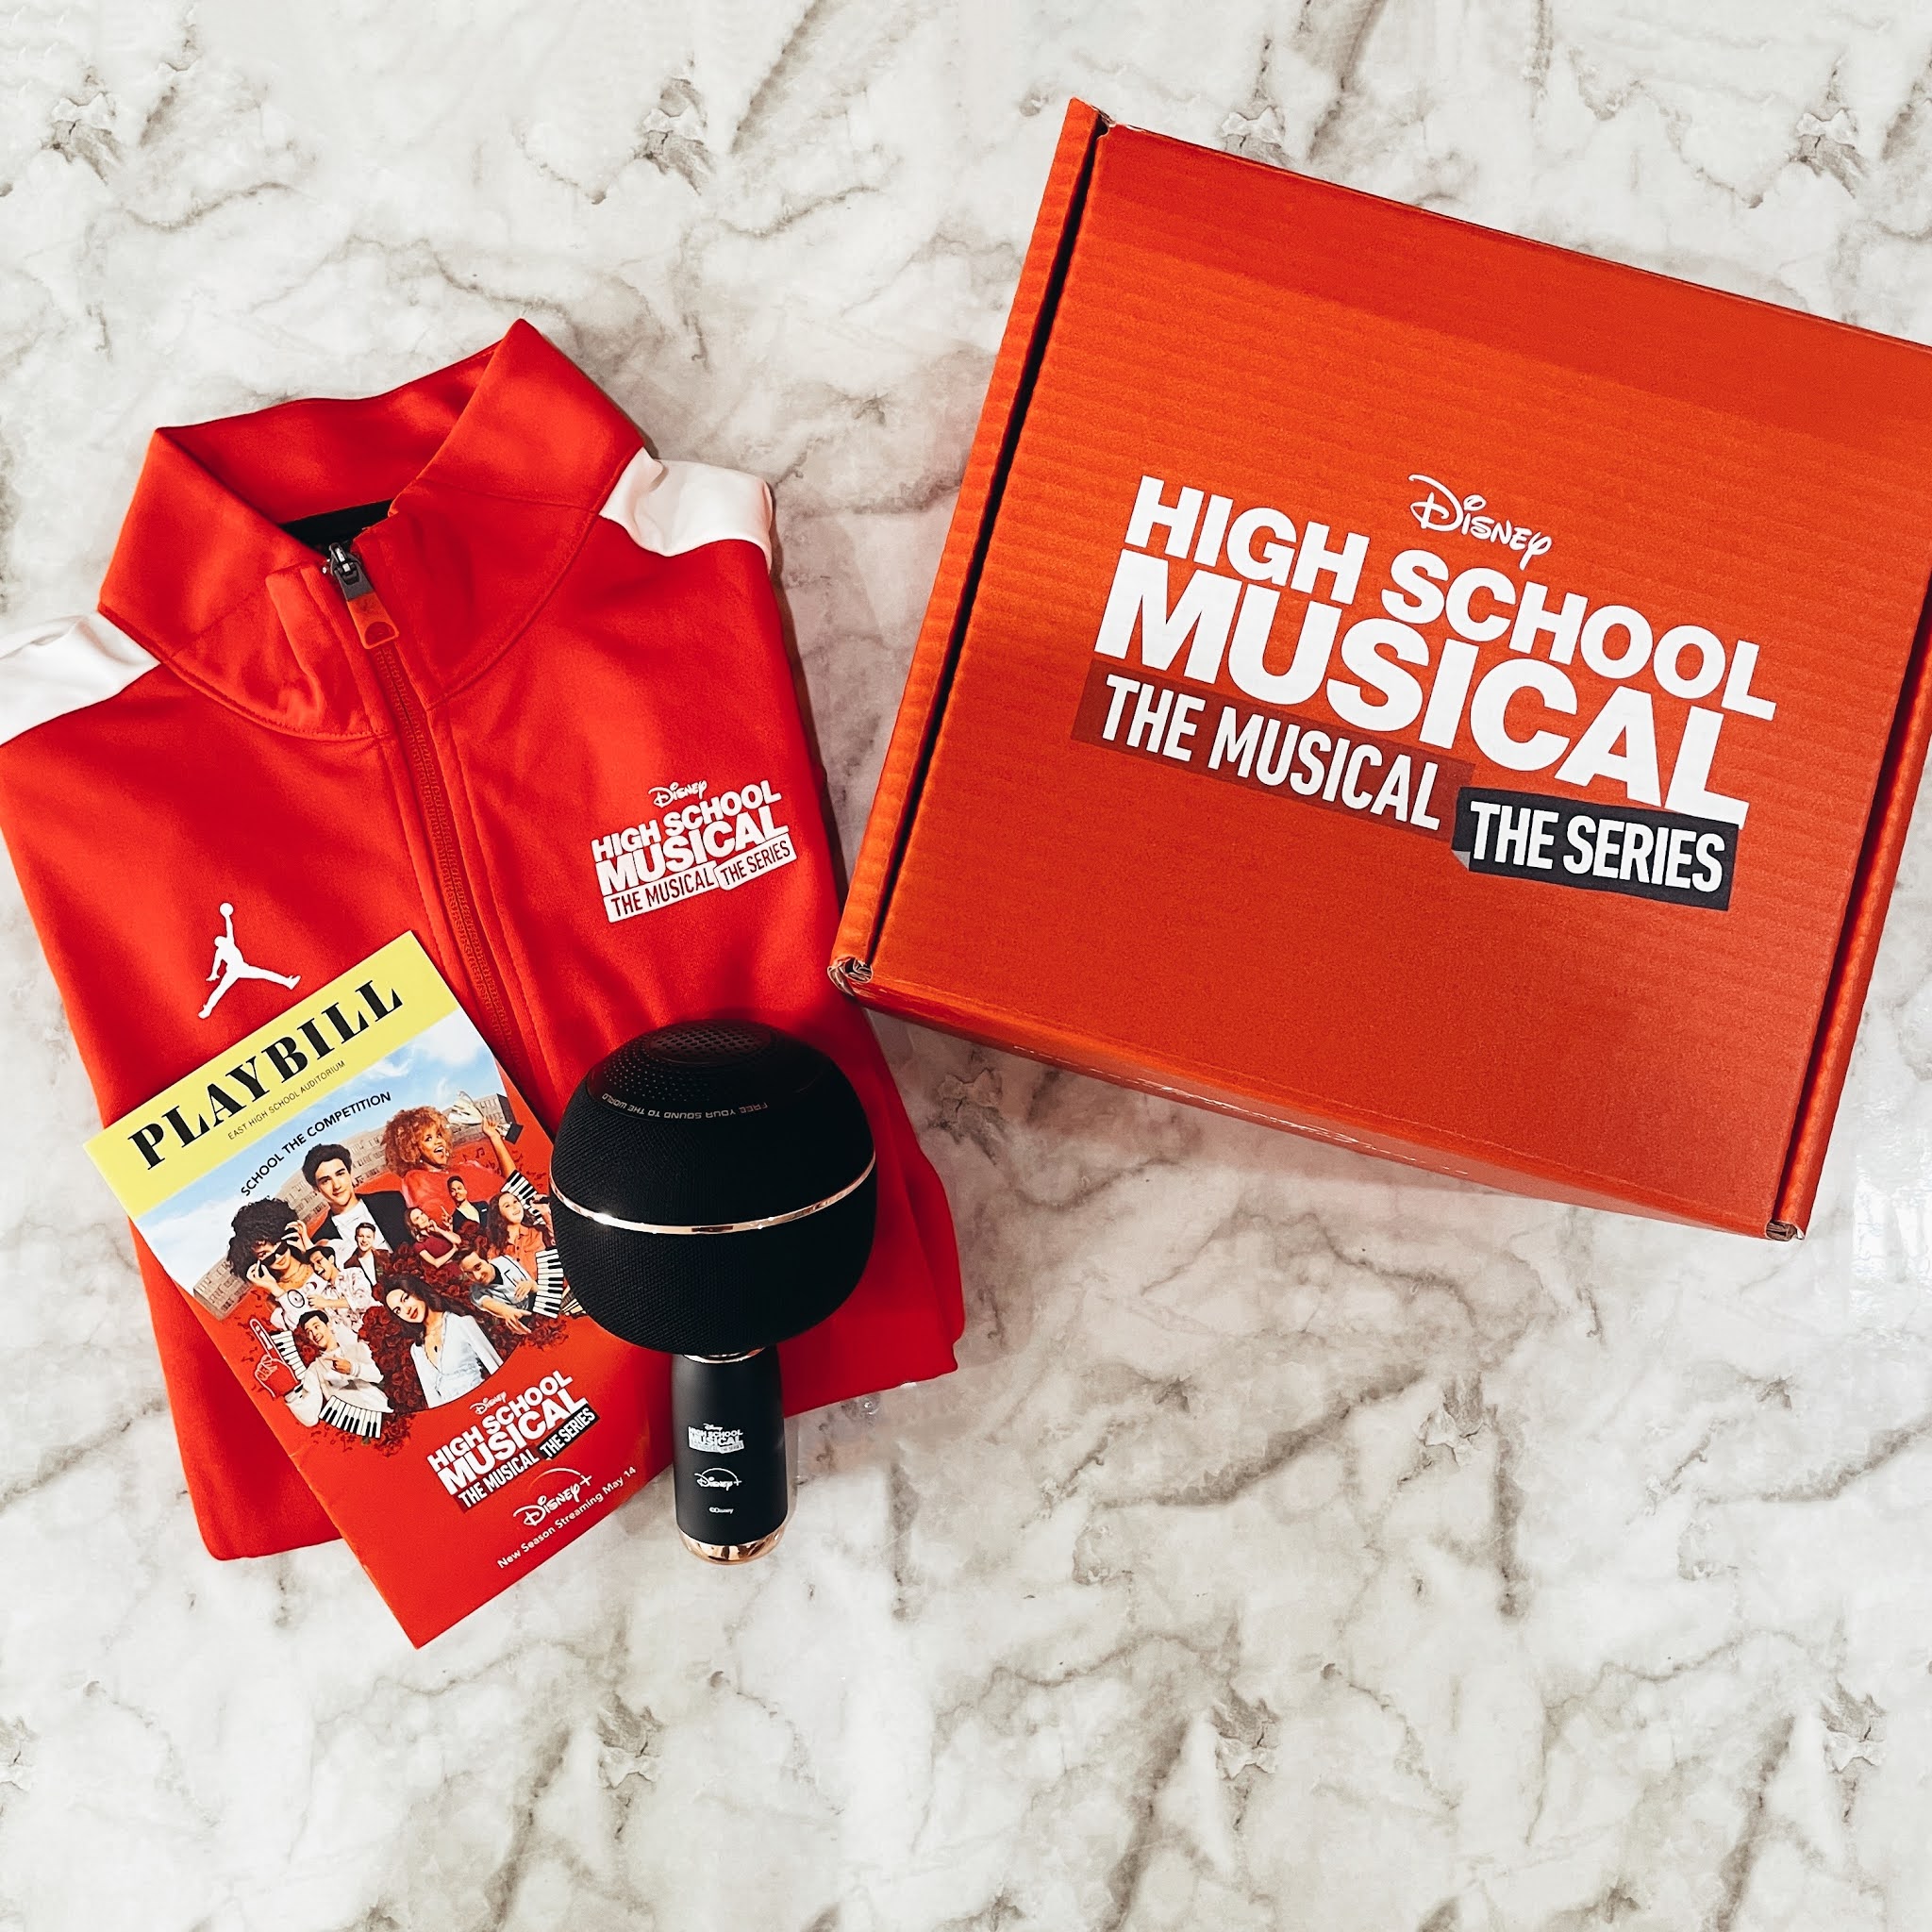 THE The Disney+ Series\' Musical: premiering - PATRICIOS 14th The May on High School on Musical: